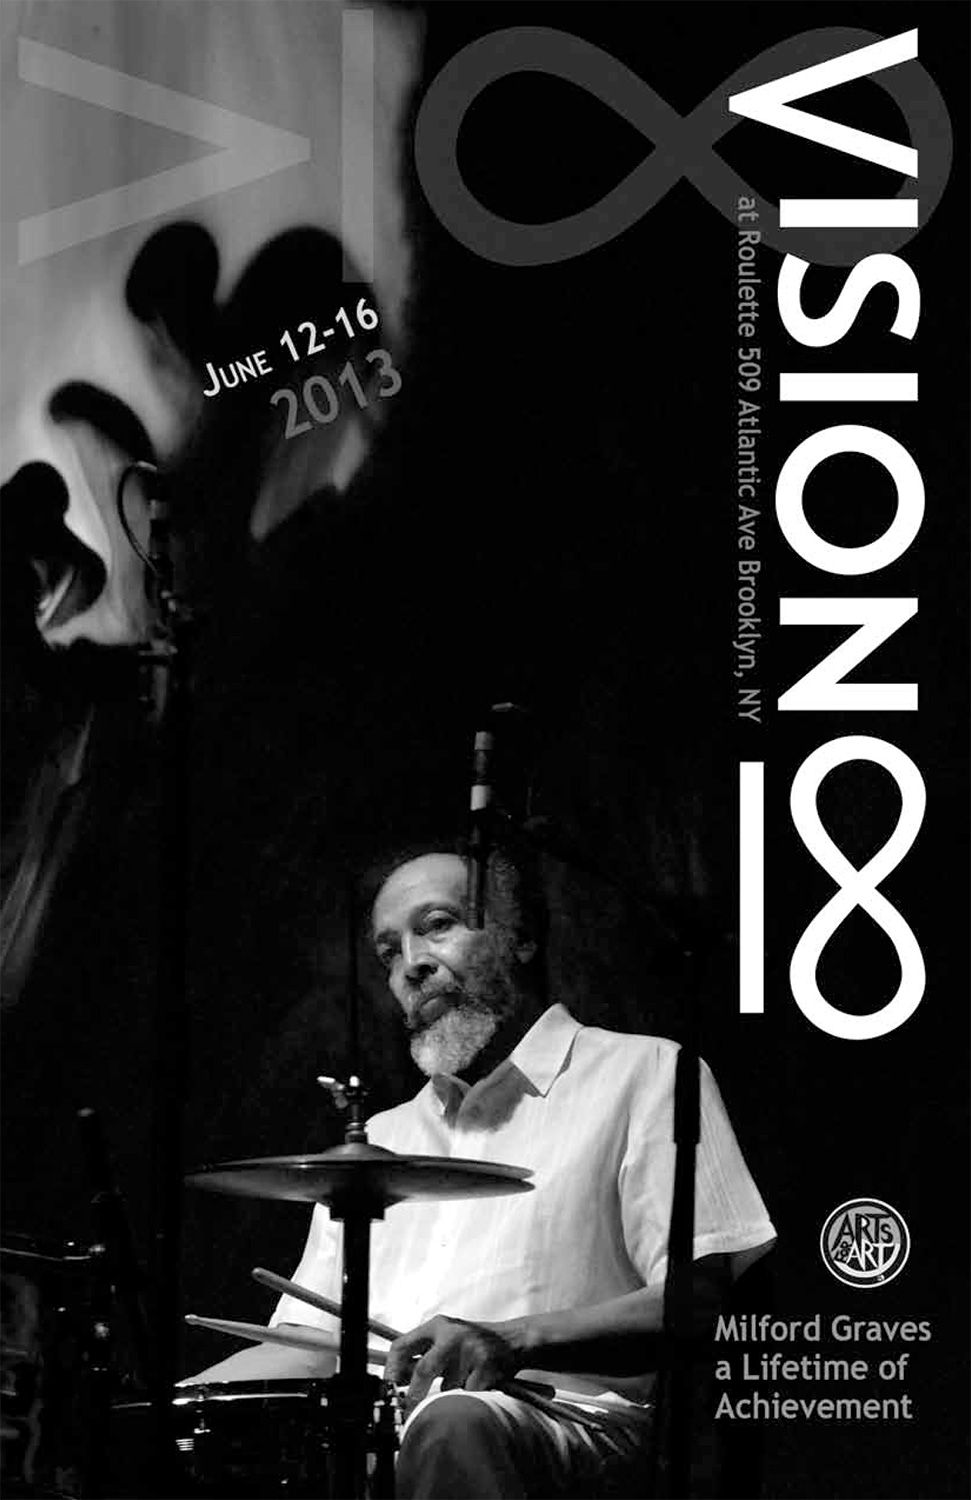 black-and-white cover for the 21 Vision Festival brochure featuring a photo of drummer Milford Graves and the V18 logo